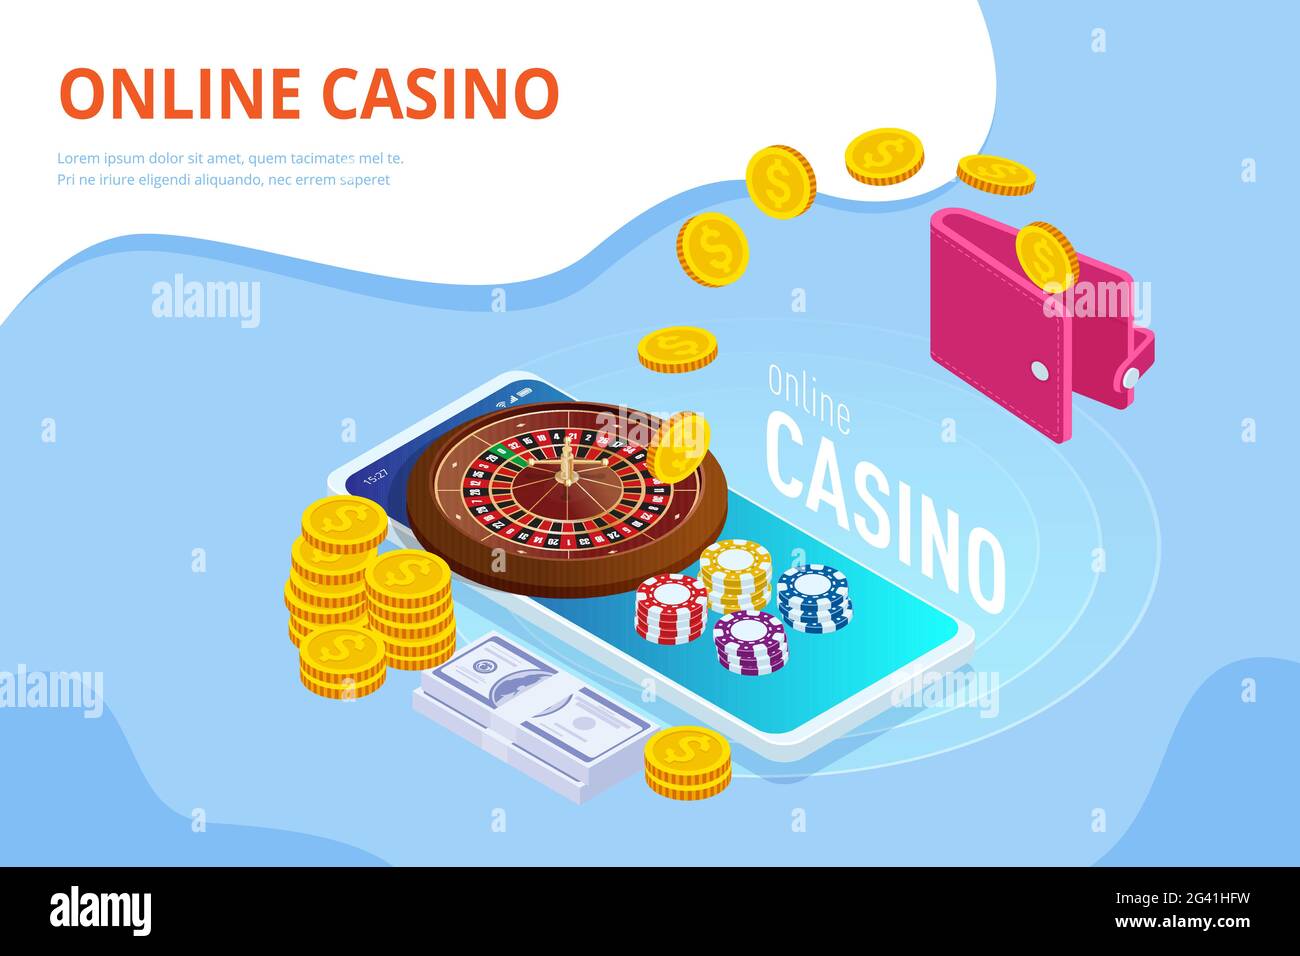 Huge Slots Scam or Not? +++ Our Review 2021 from Scams.info